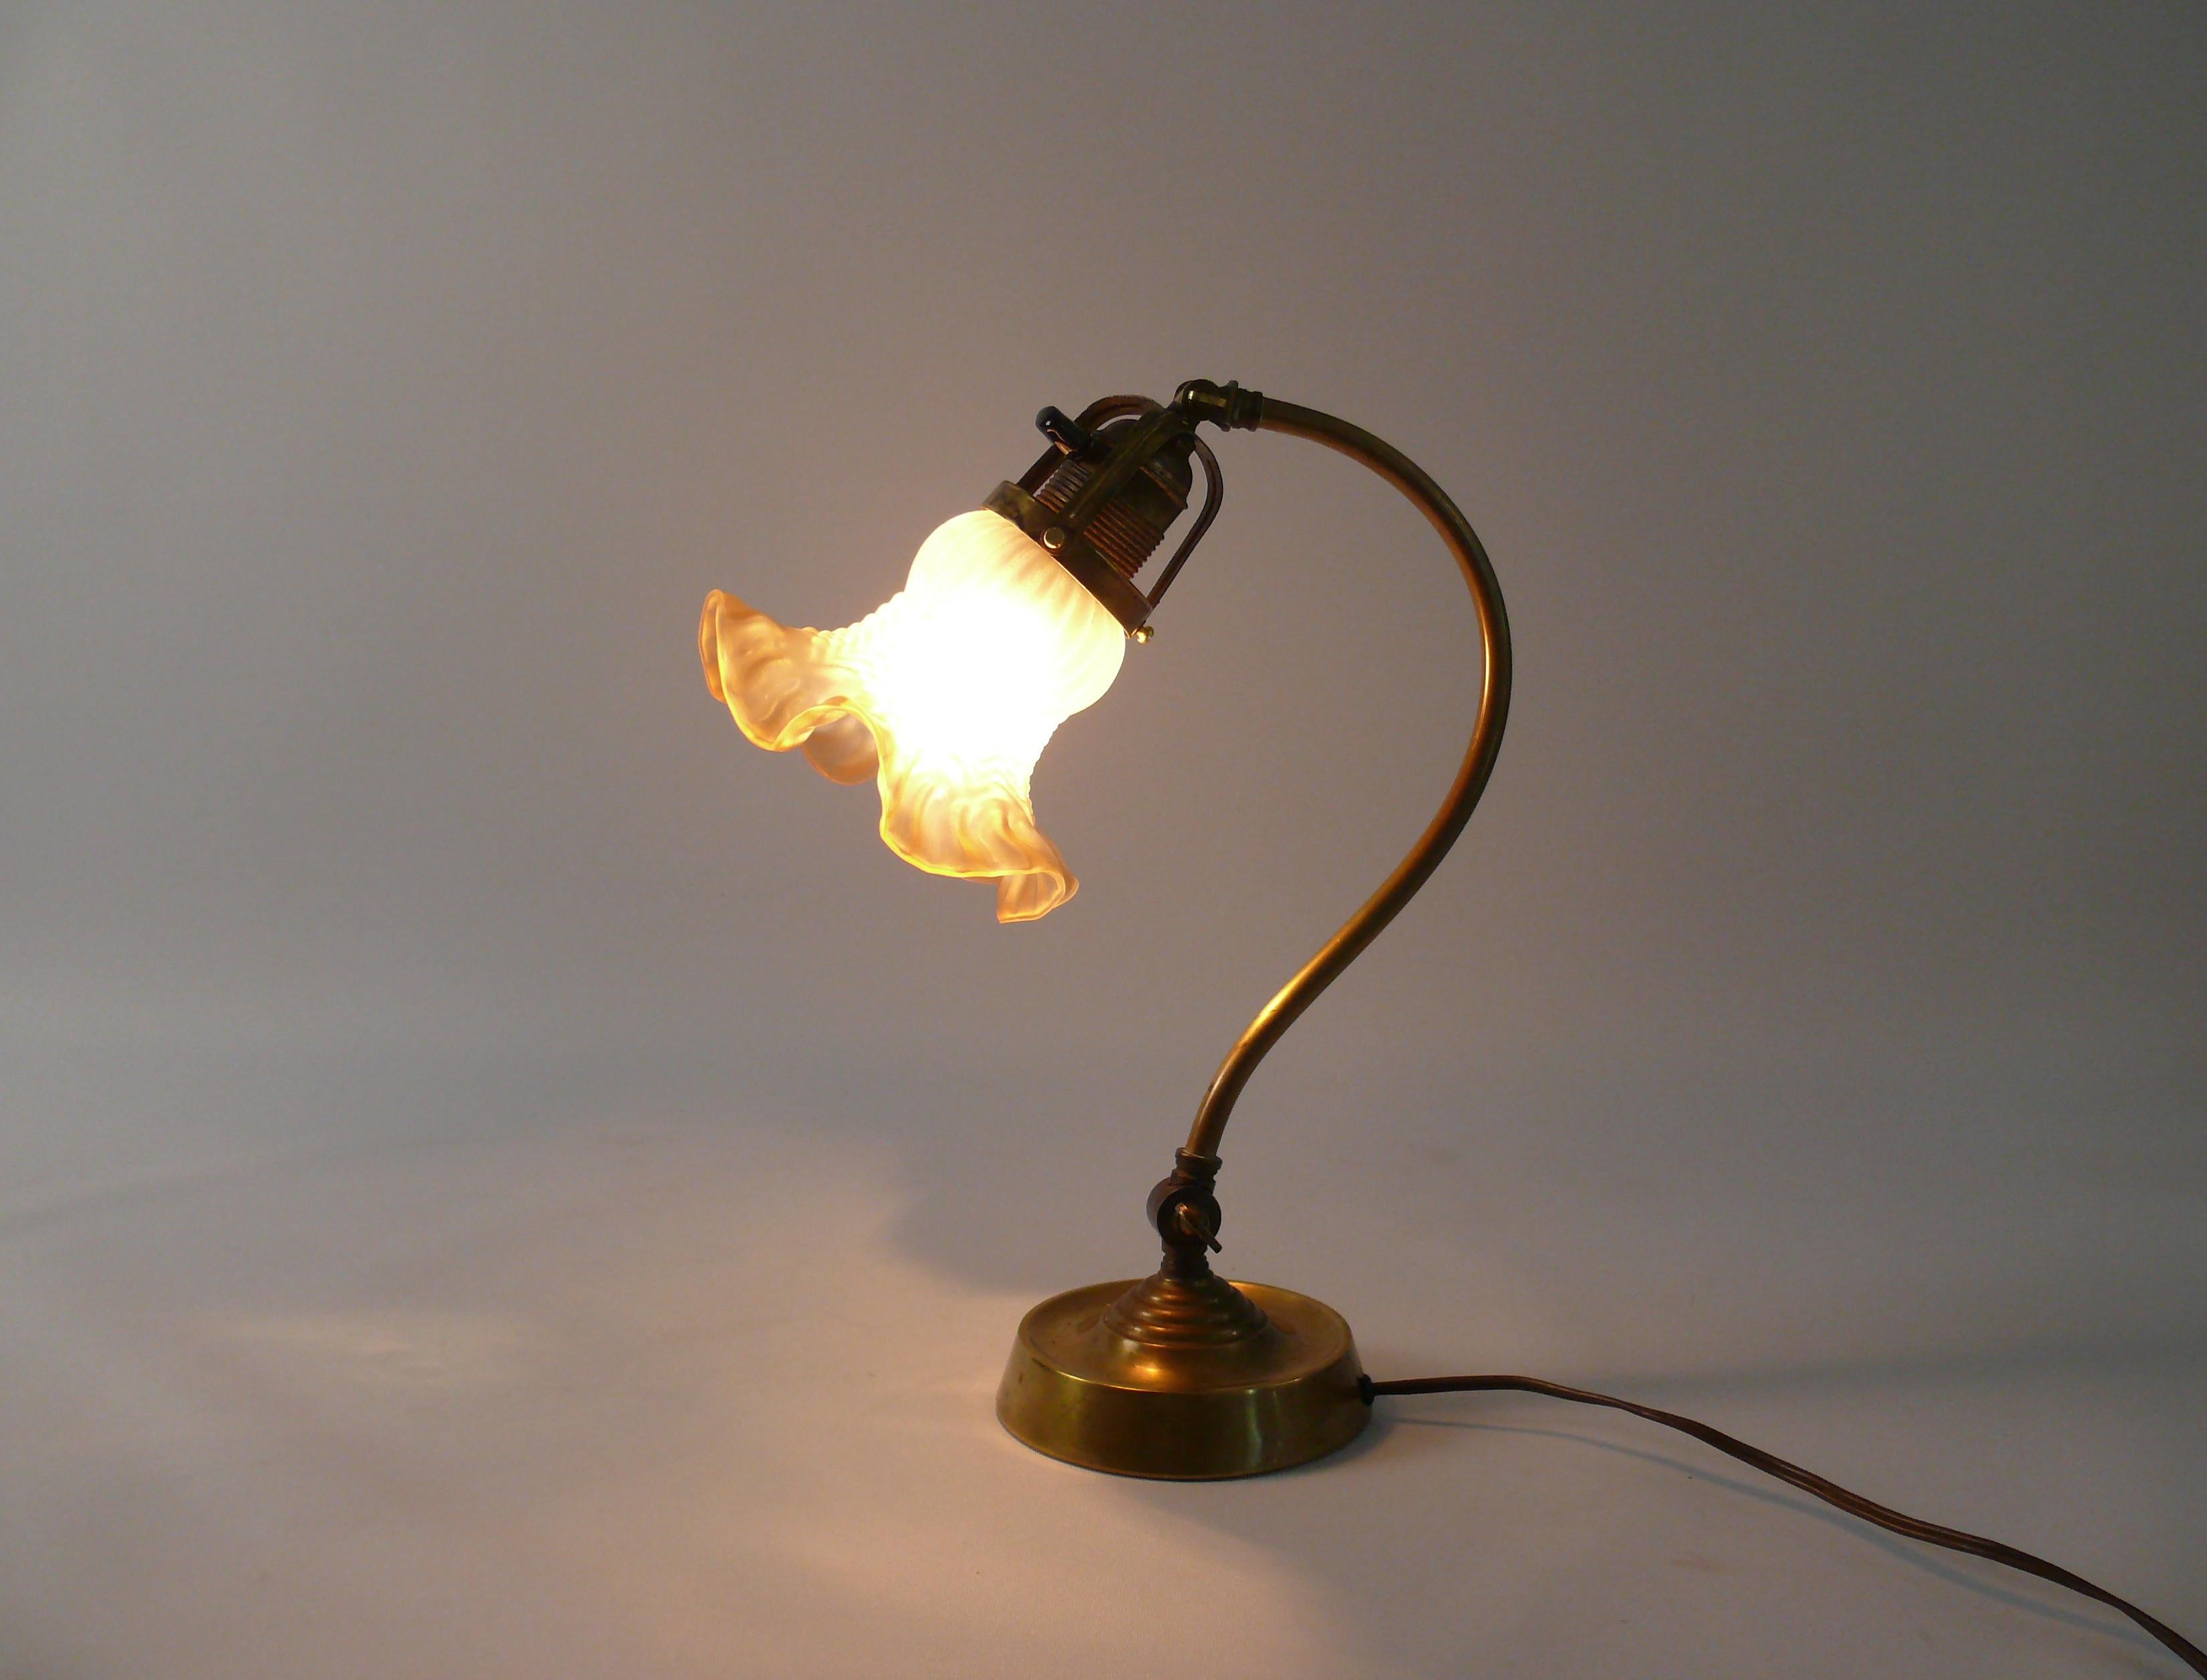 Original Art Nouveau table lamp from the 1920s in good working condition, can also be used as a Piano Lamp. The lamp consists of a stable brass base with a metal core and a flower-shaped glass shade. The screen is in good condition. It can be